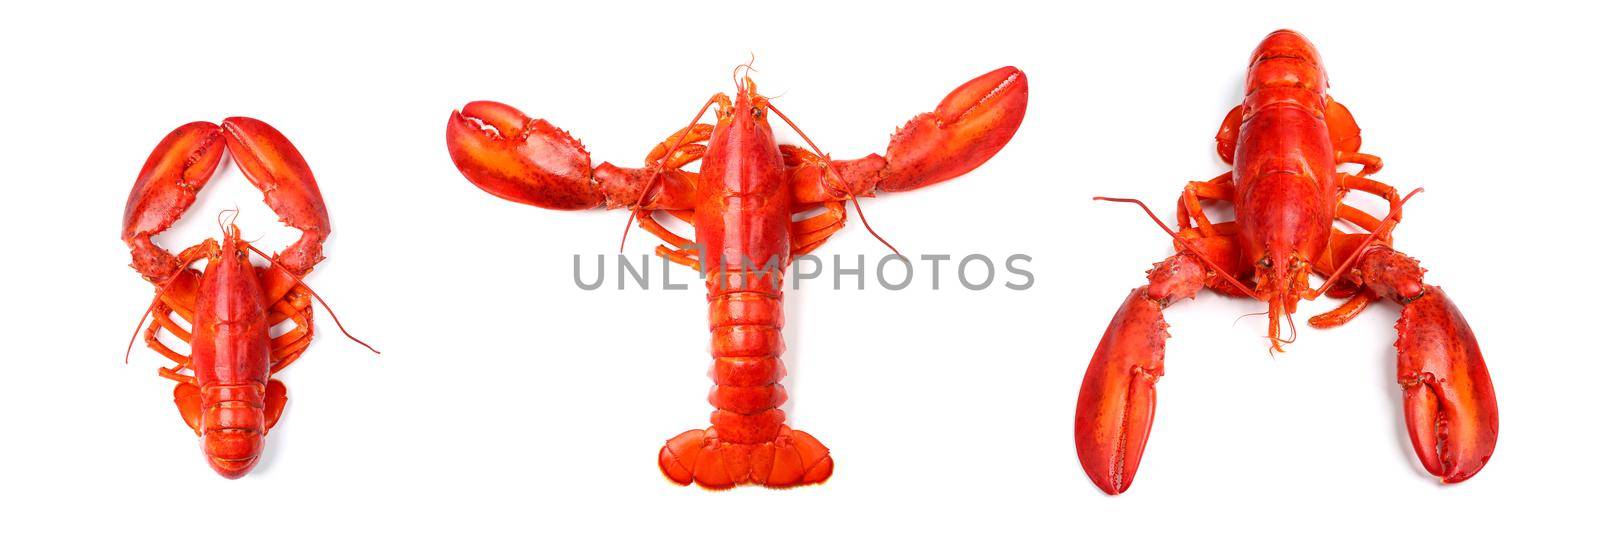 Lobsters three body isolated on white background